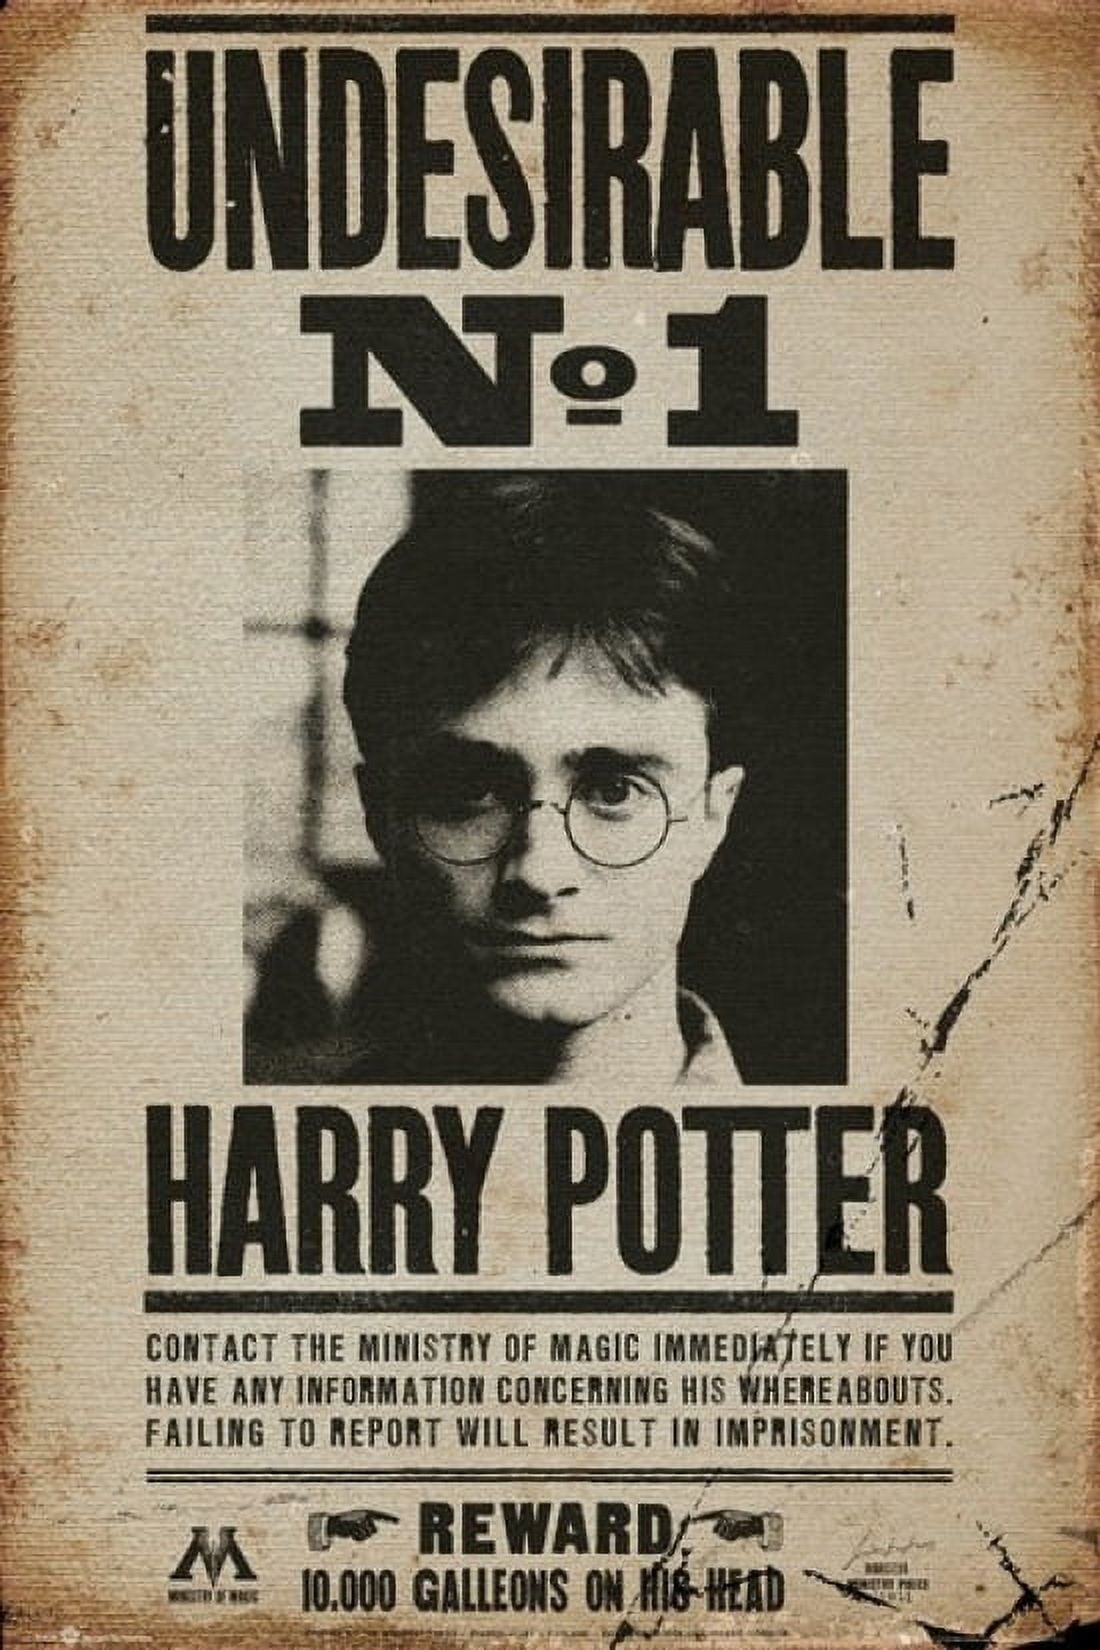 Harry Potter Undesirable No 1 Wanted Poster Poster 24 X 36 Walmart